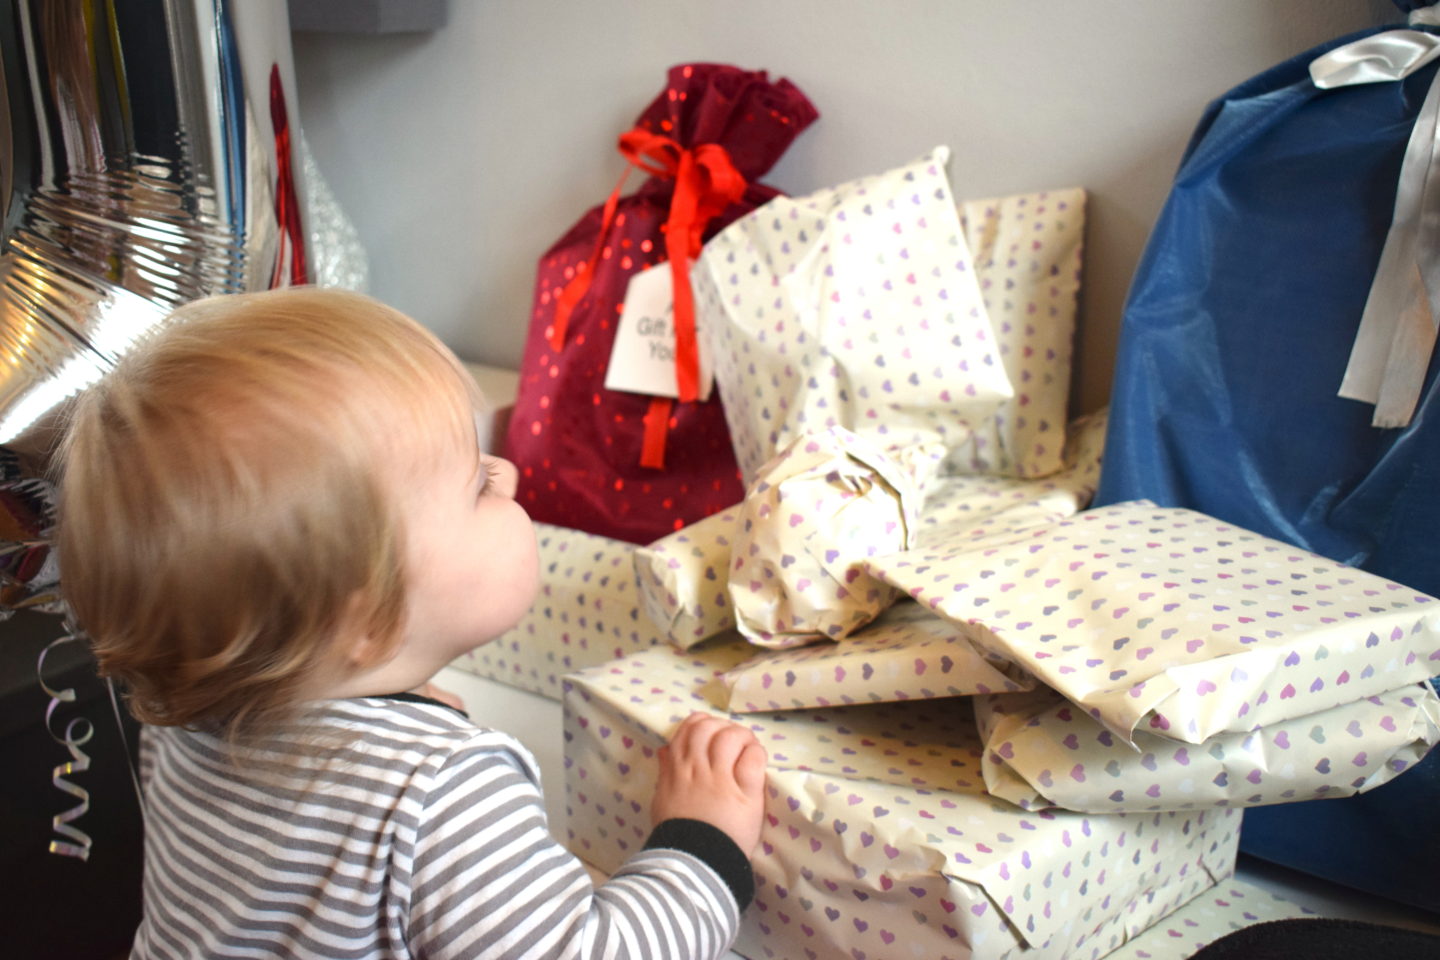 one year old girl, looking at pile of birthday presents